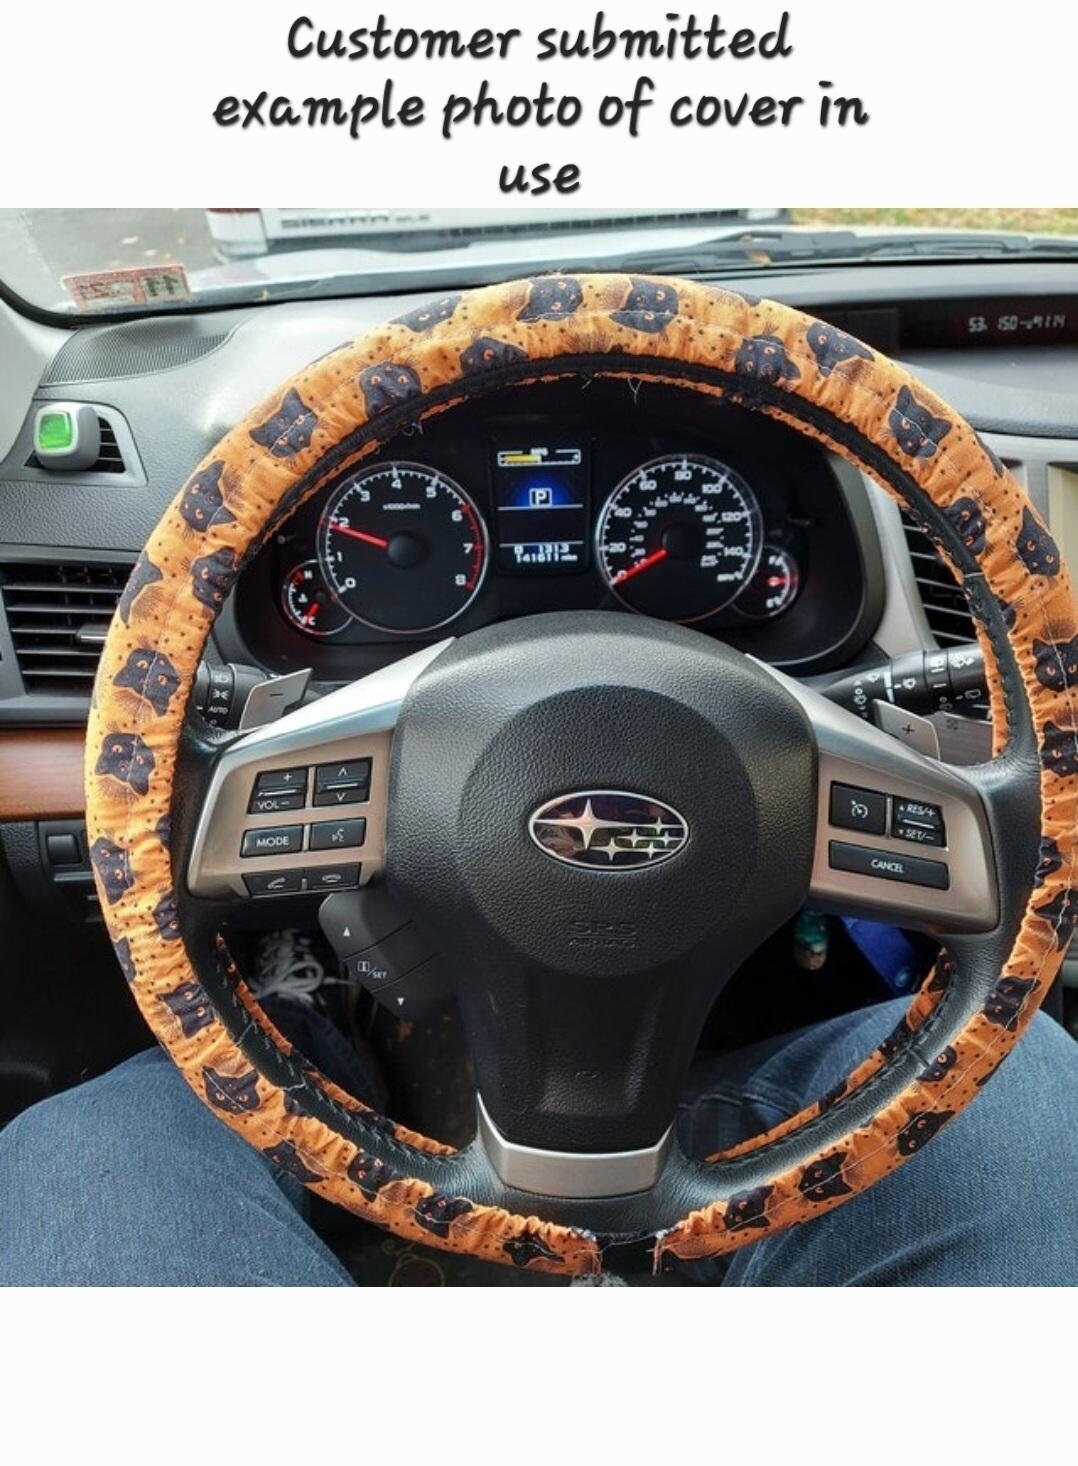 Hawaiian Floral Steering Wheel Cover, 100% Cotton, Washable, Batik, Sunset, Tropical - Harlow's Store and Garden Gifts